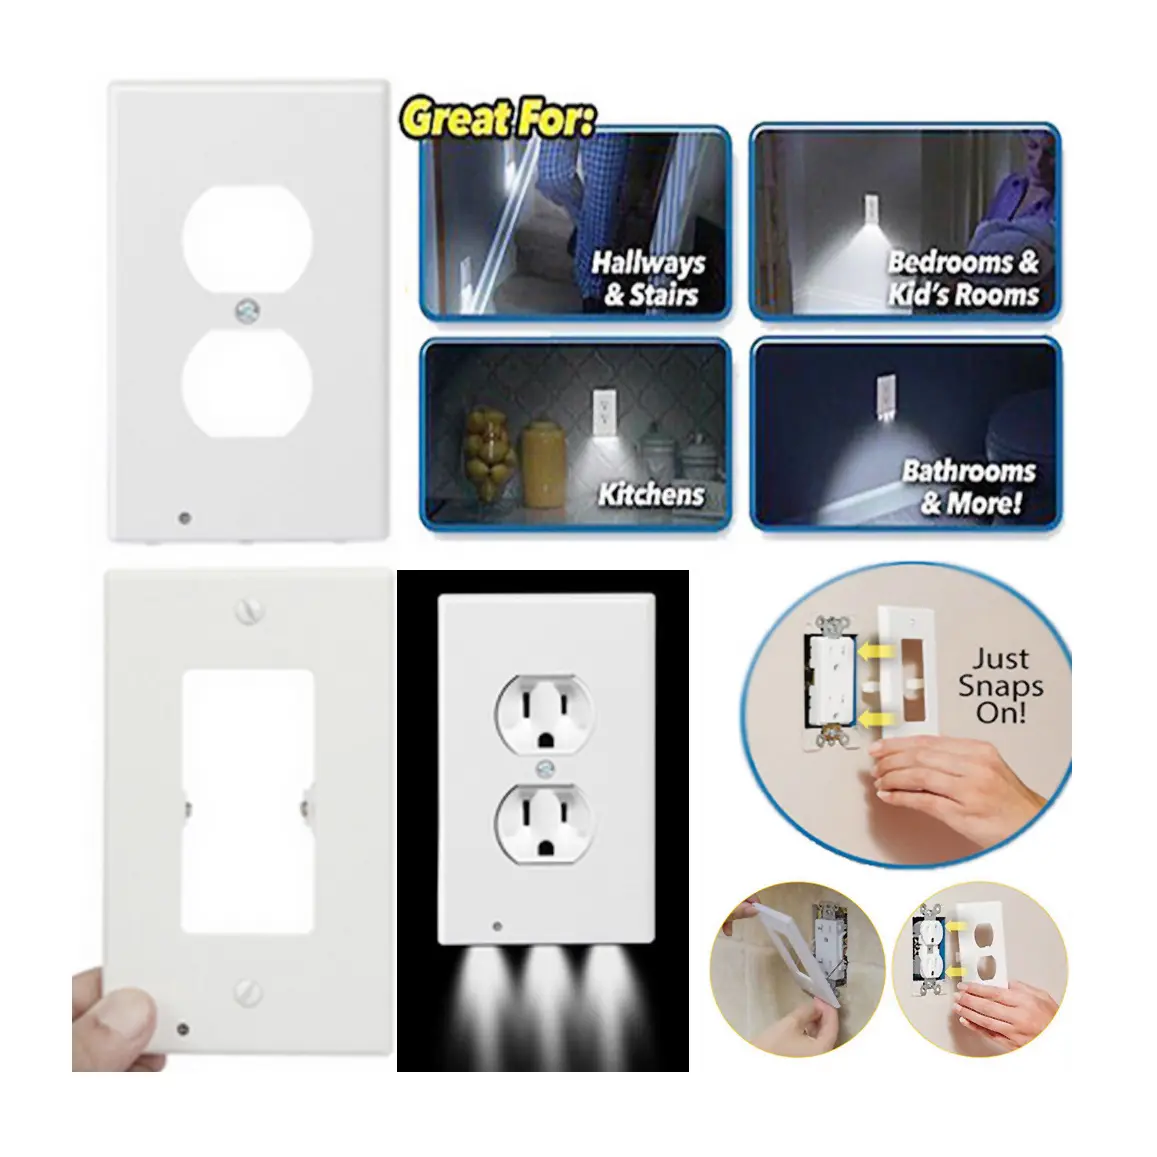 Popular Items American Standard Household White Color Wall Socket With Smart On/Off Night Light